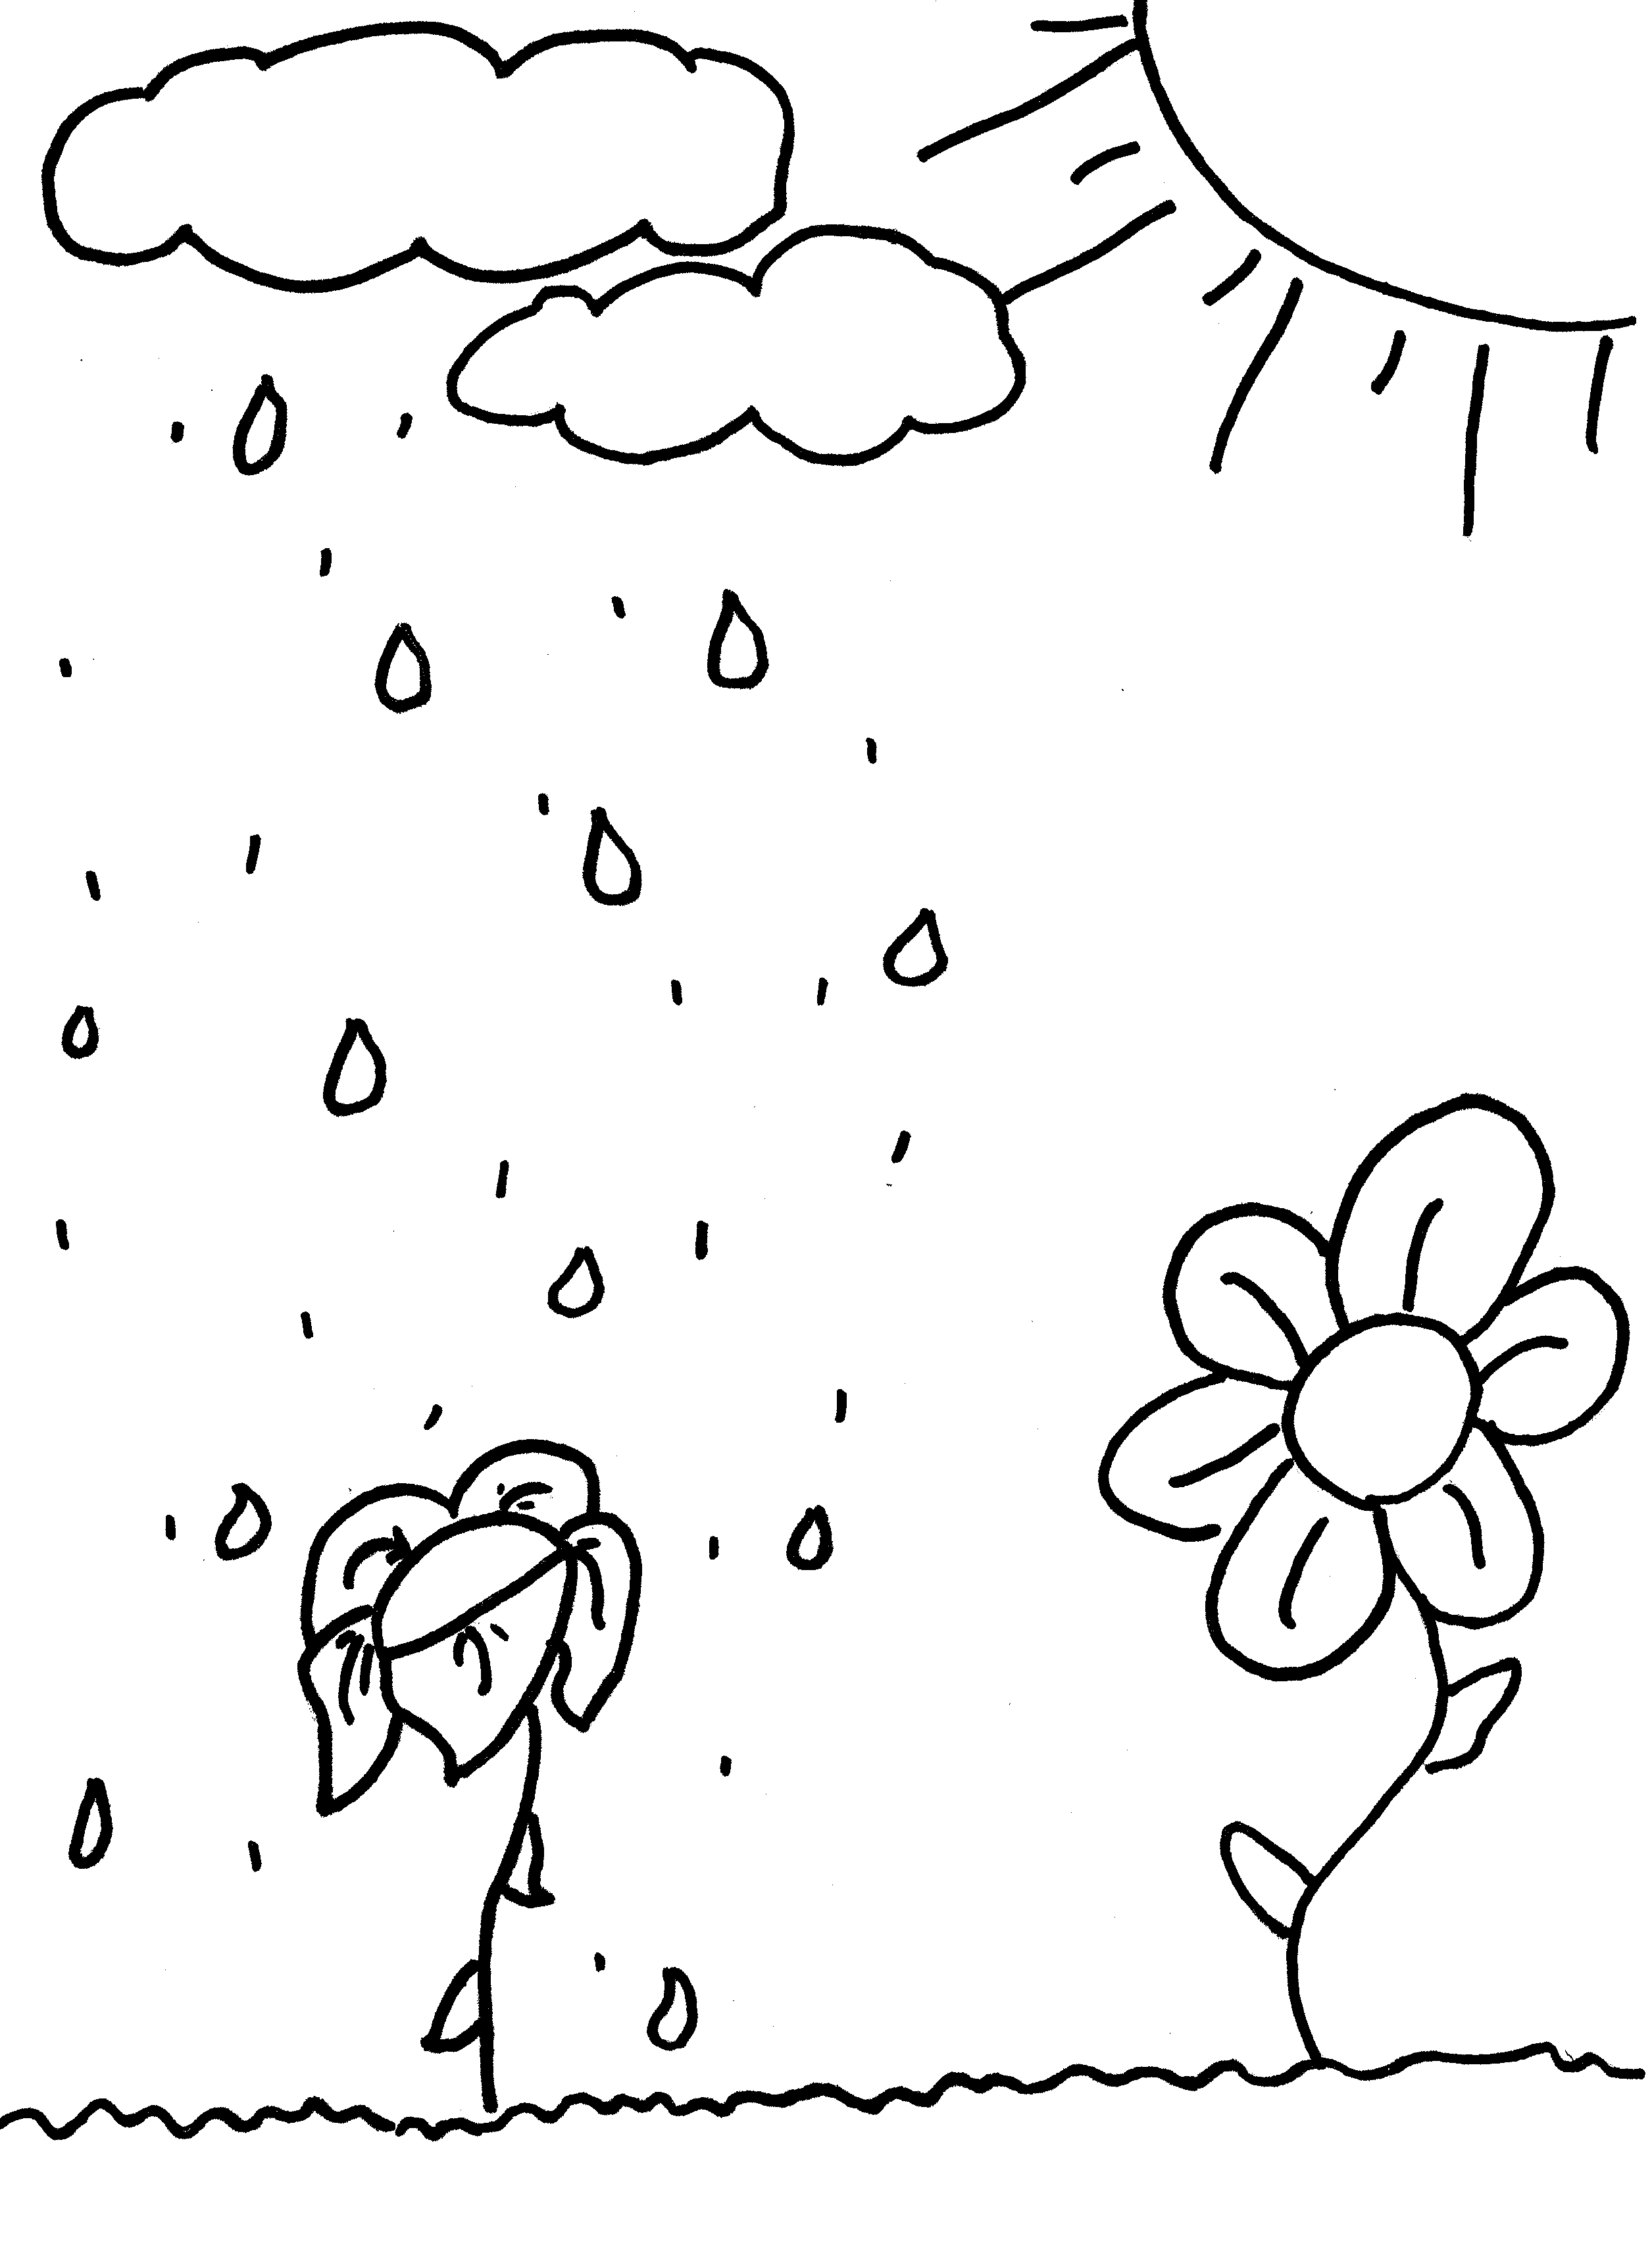 Free coloring page - sun shower with flowers